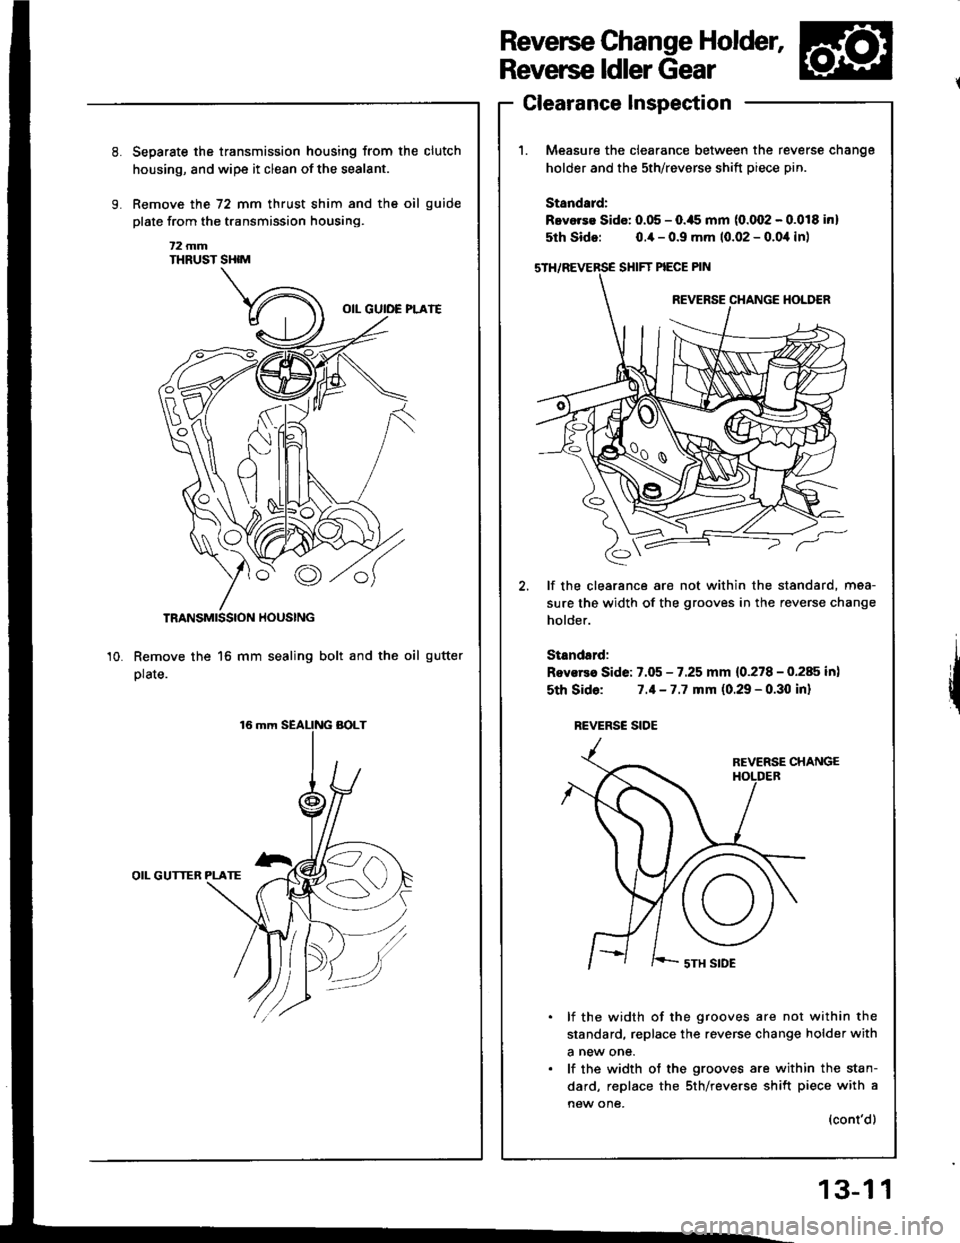 ACURA INTEGRA 1994  Service User Guide Reverse Change Holder,
Reverse ldler Gear
Clearance Inspection
Measure the clearance between the re
holder and the sth/revsrse shift piece p
Standard:
Bevorse Sido: 0.05 - O.ils mm (0.002 - (
5th Sido